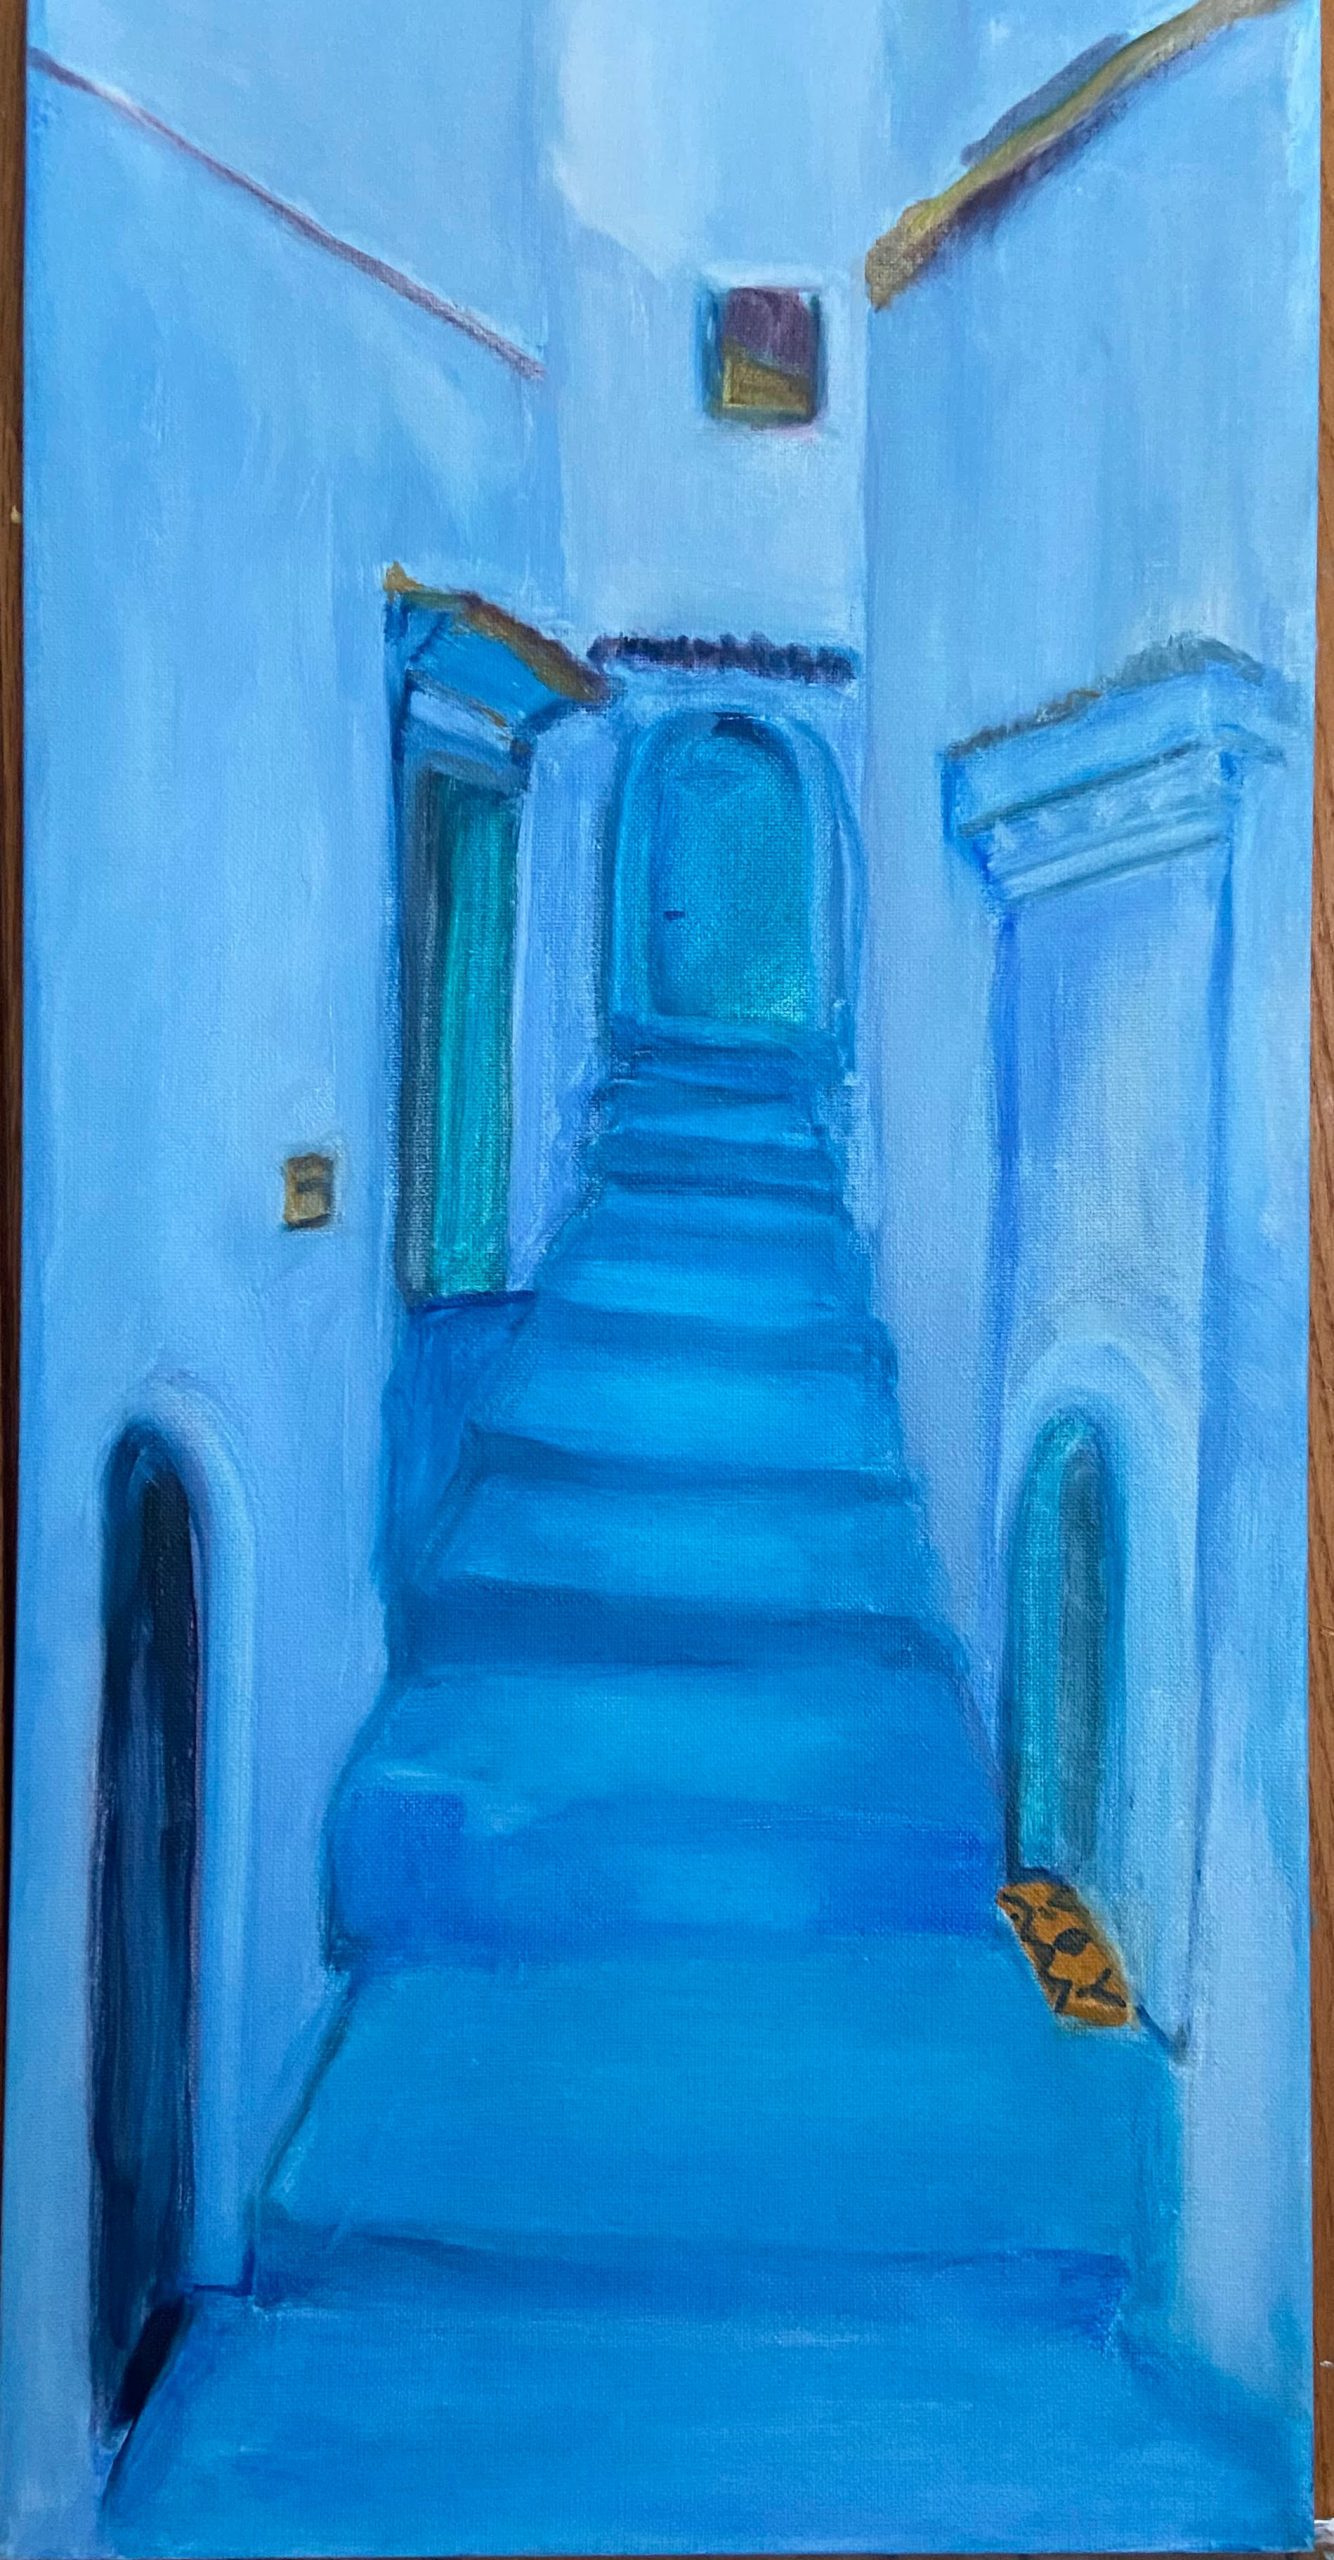 Painting done with various shades of blue paint showing a staircase leading use to a blue door